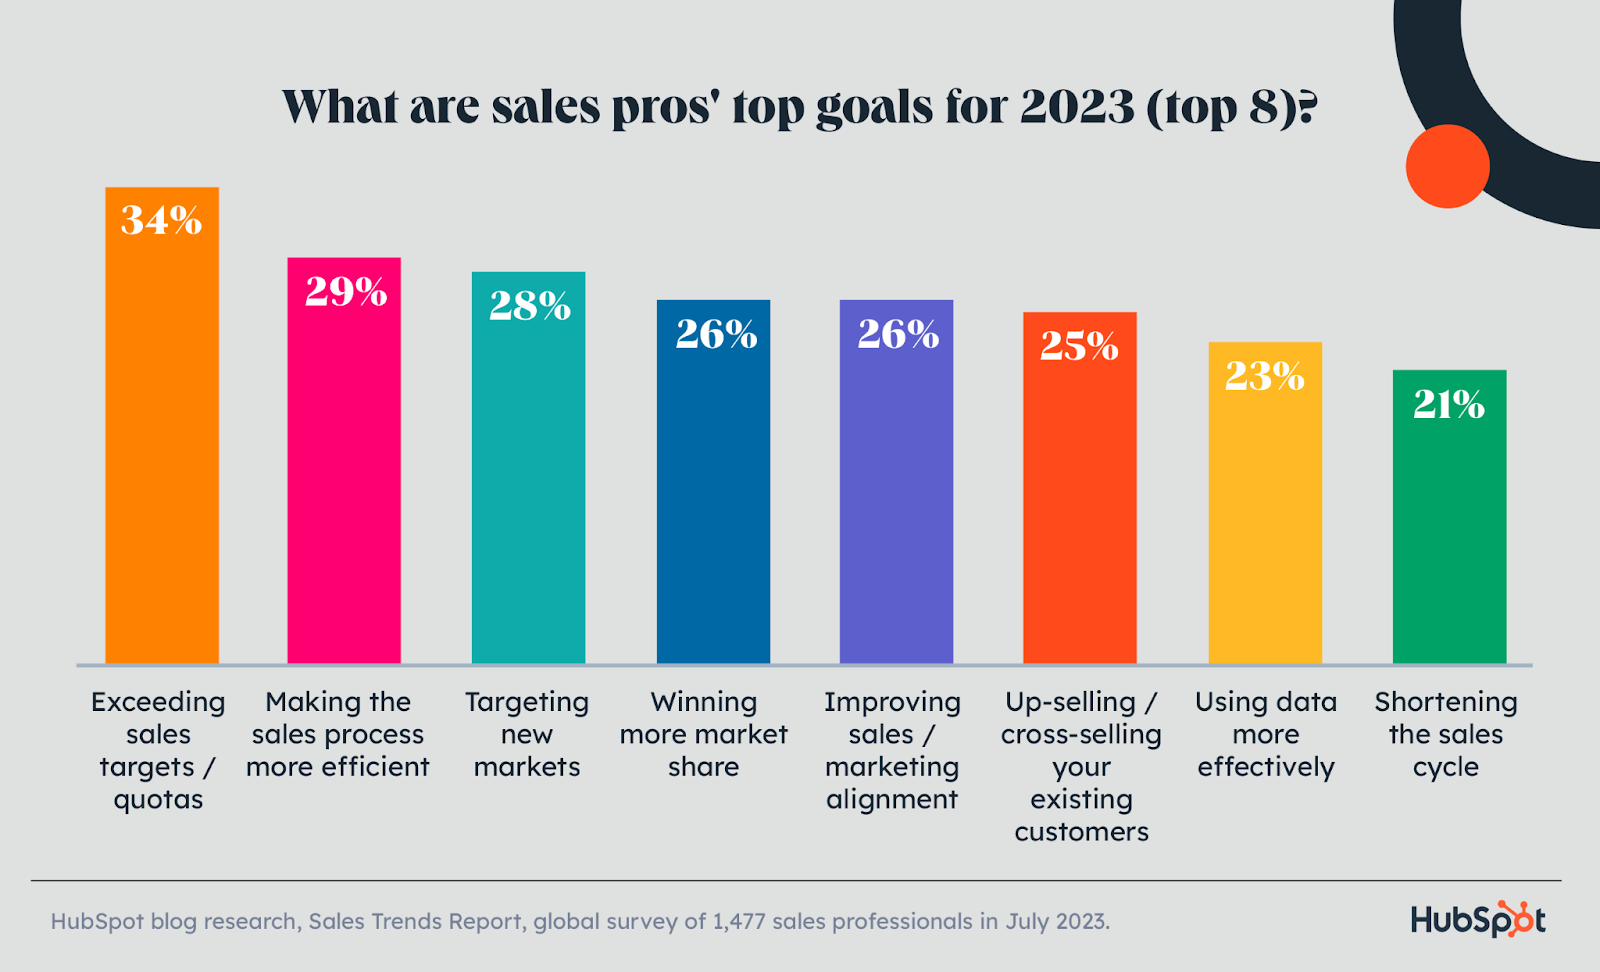 What are sales professionals top goals for 2023?